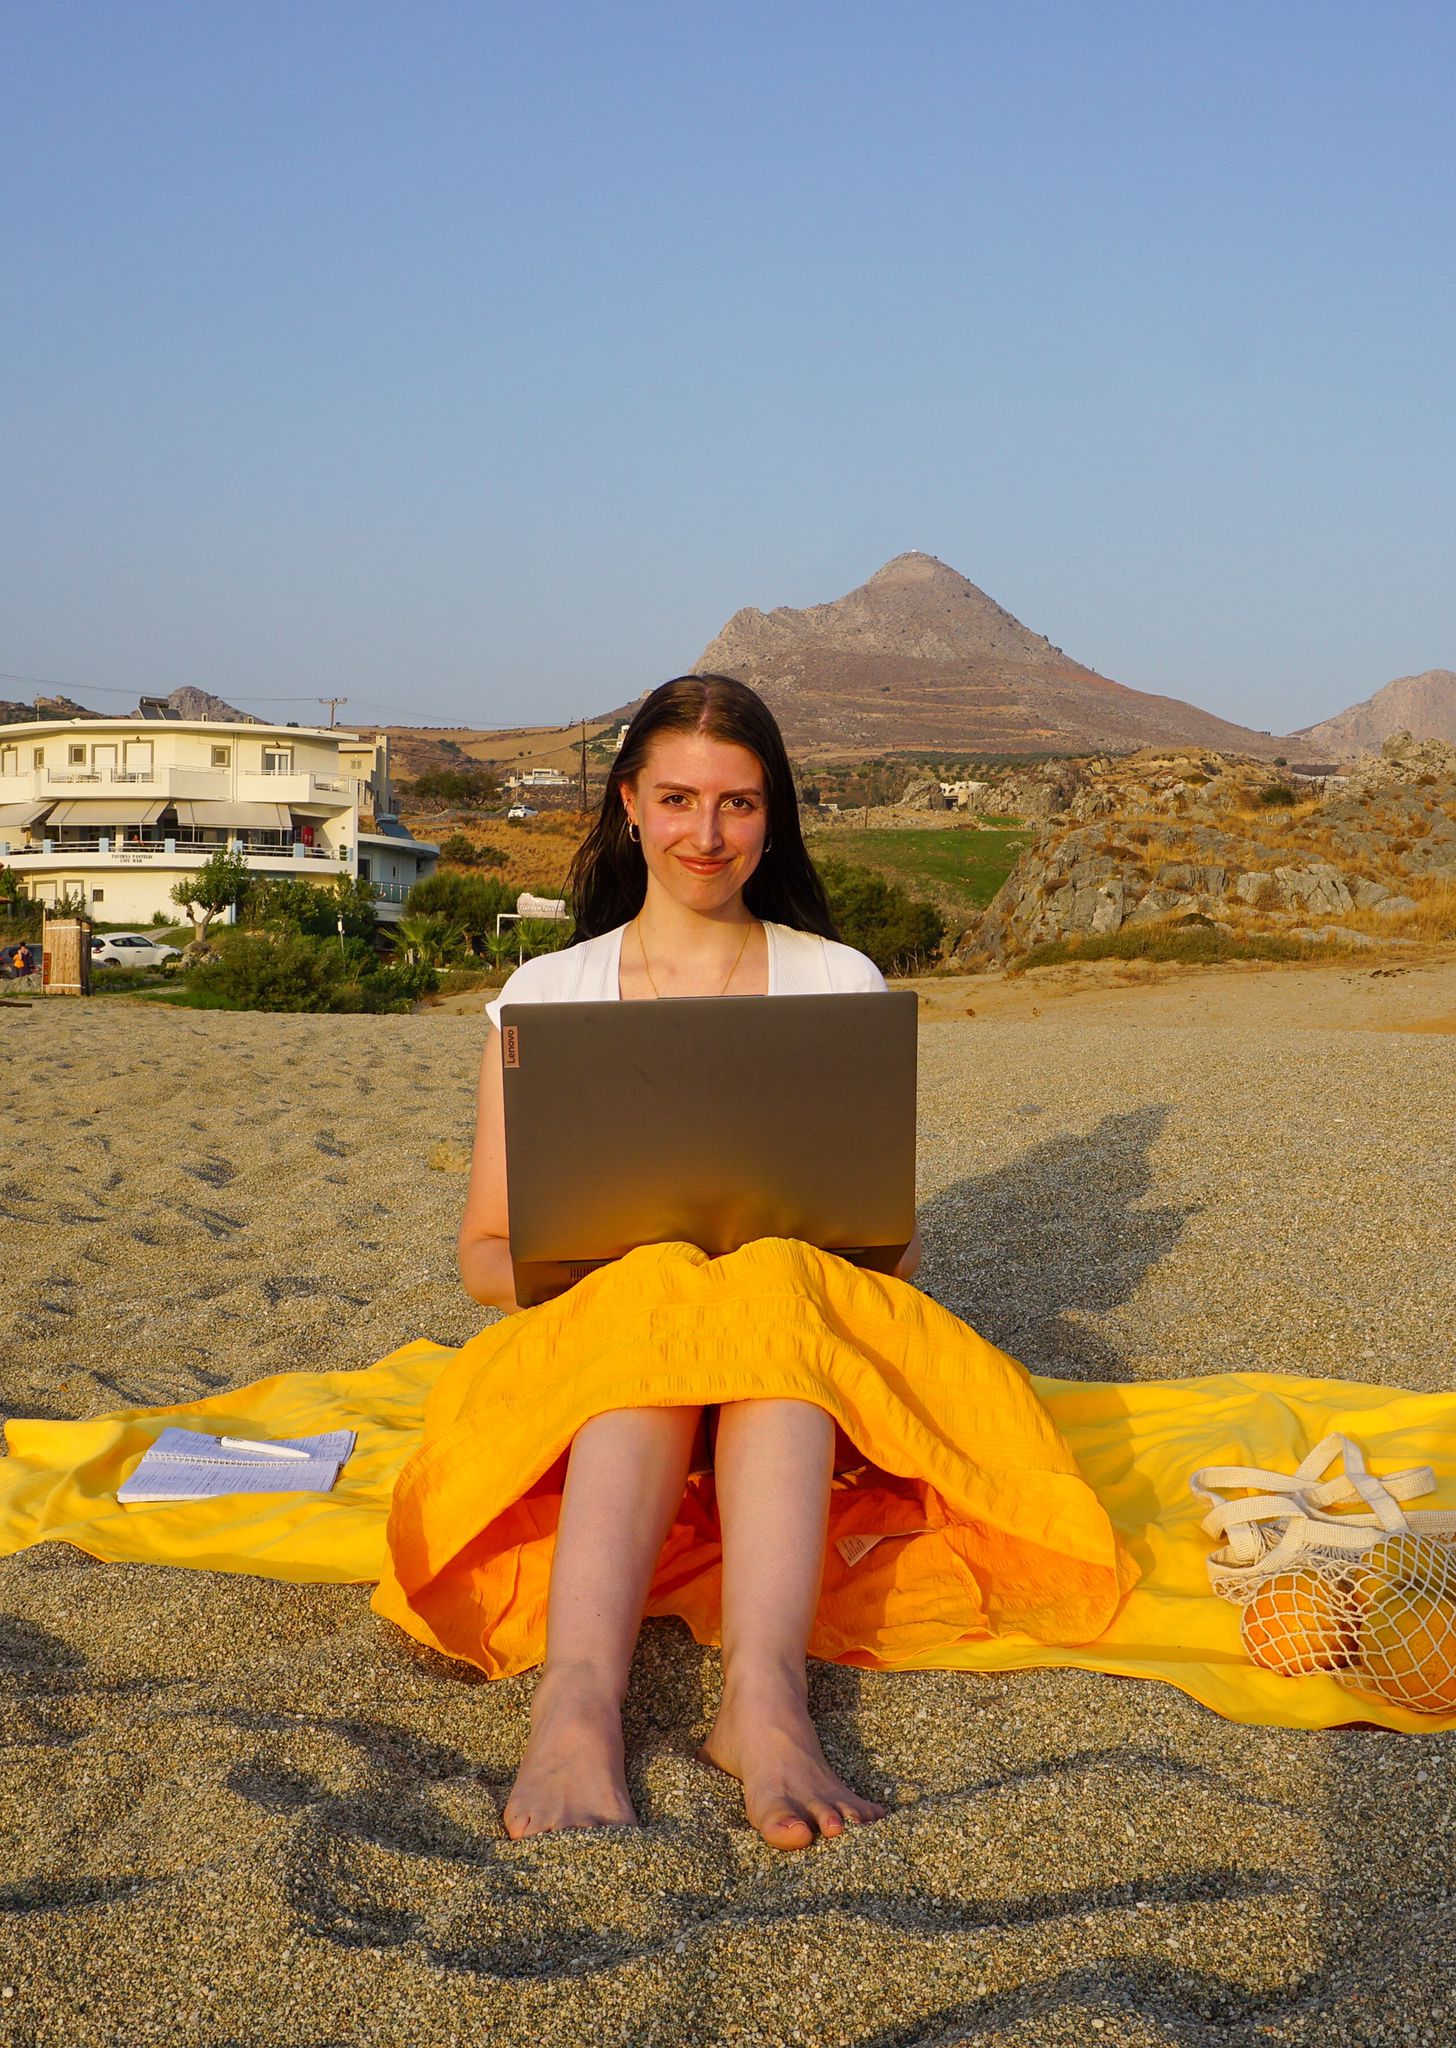 Anki sitting at the beach with her laptop, house & mountains in background